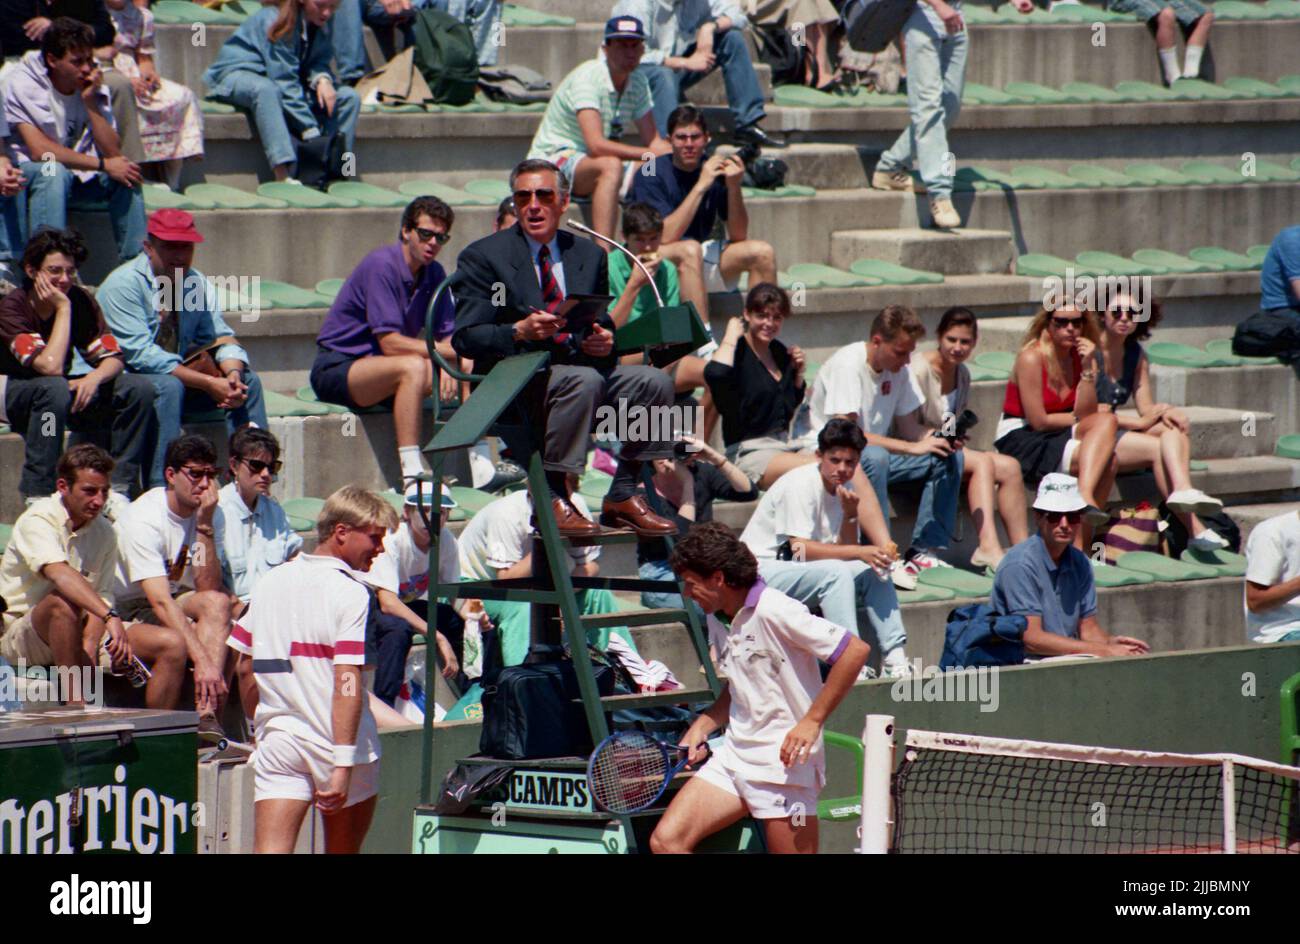 The American tennis player Jimmy Arias, before a men's singles match of the French Open on Court n°2. Paris, Roland-Garros stadium, June 1990 Stock Photo